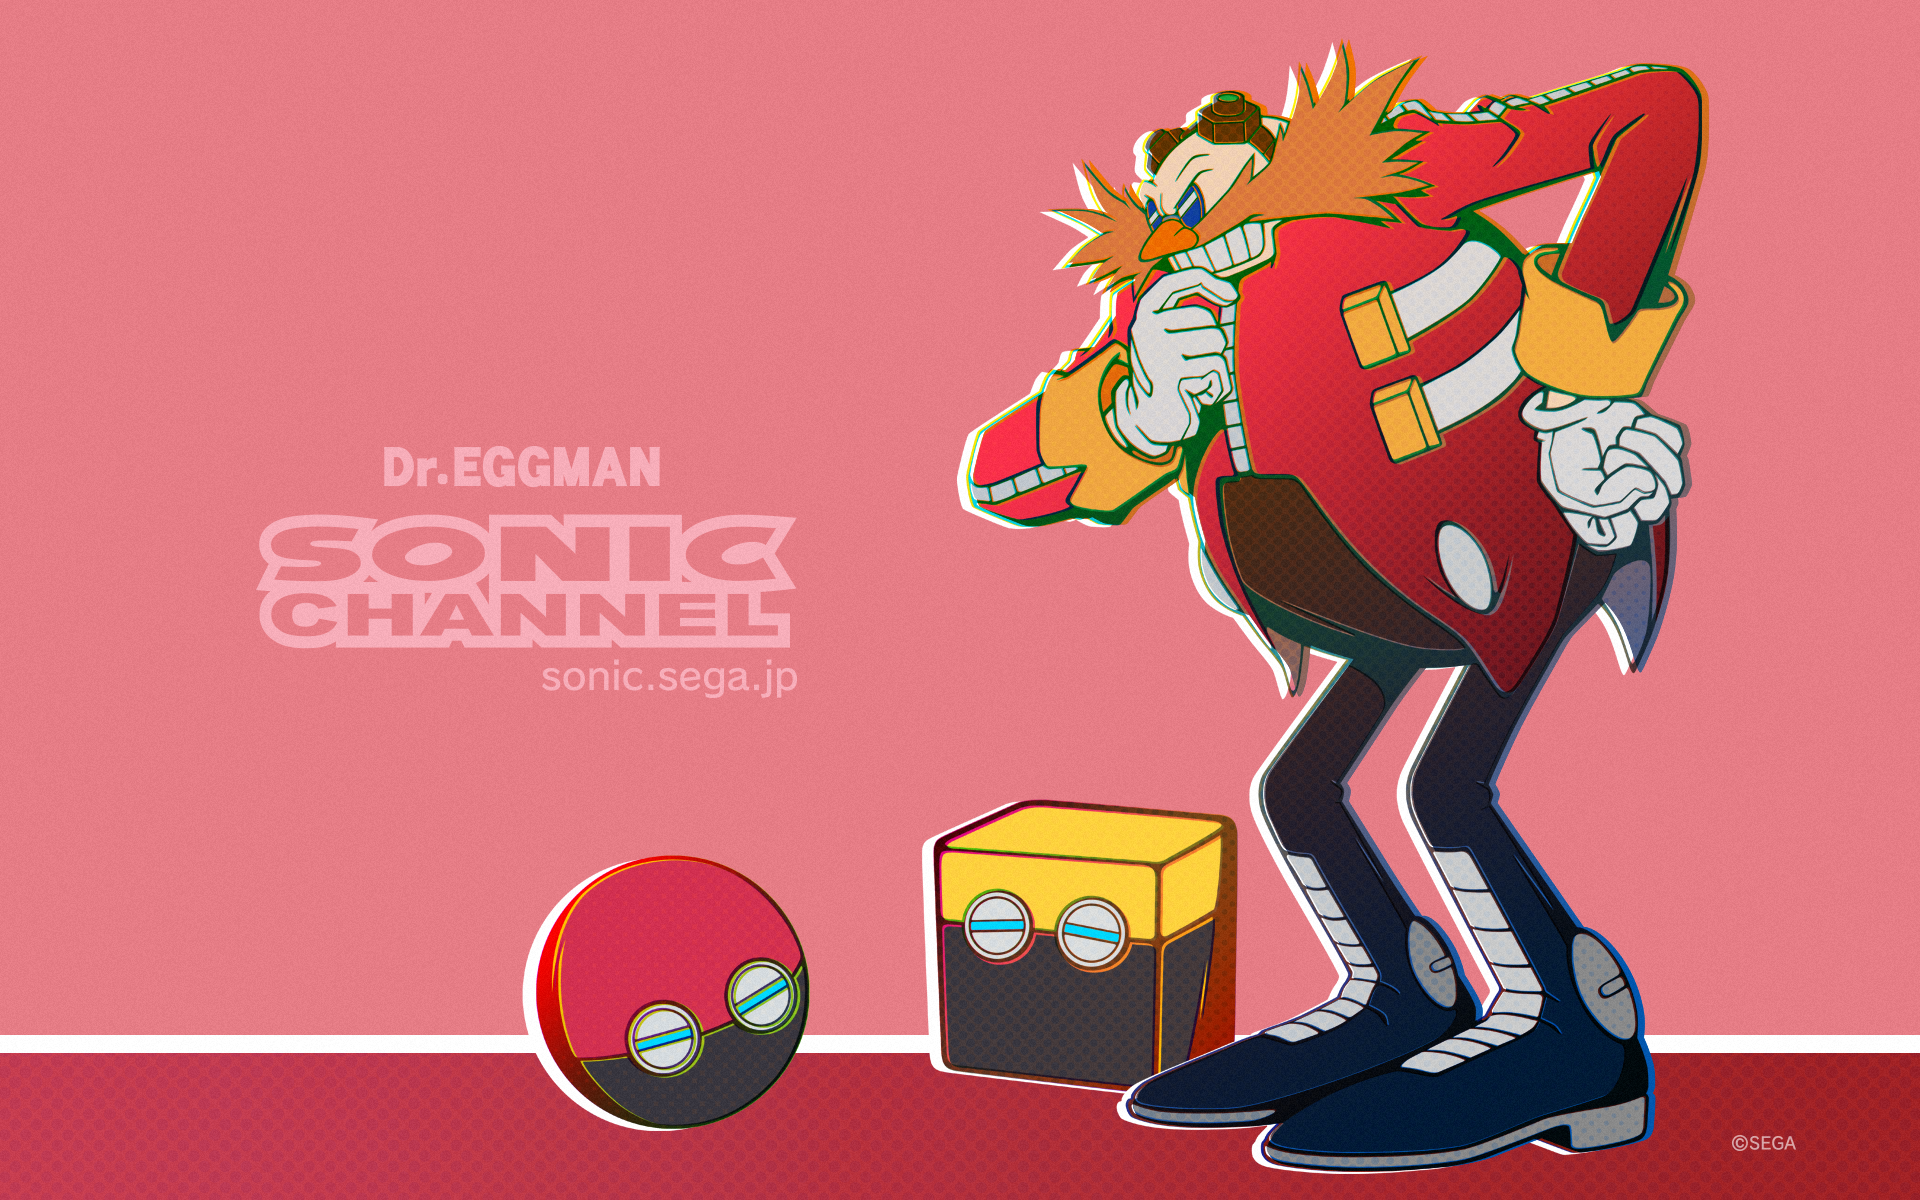 December's Sonic Channel art featuring Dr Eggman